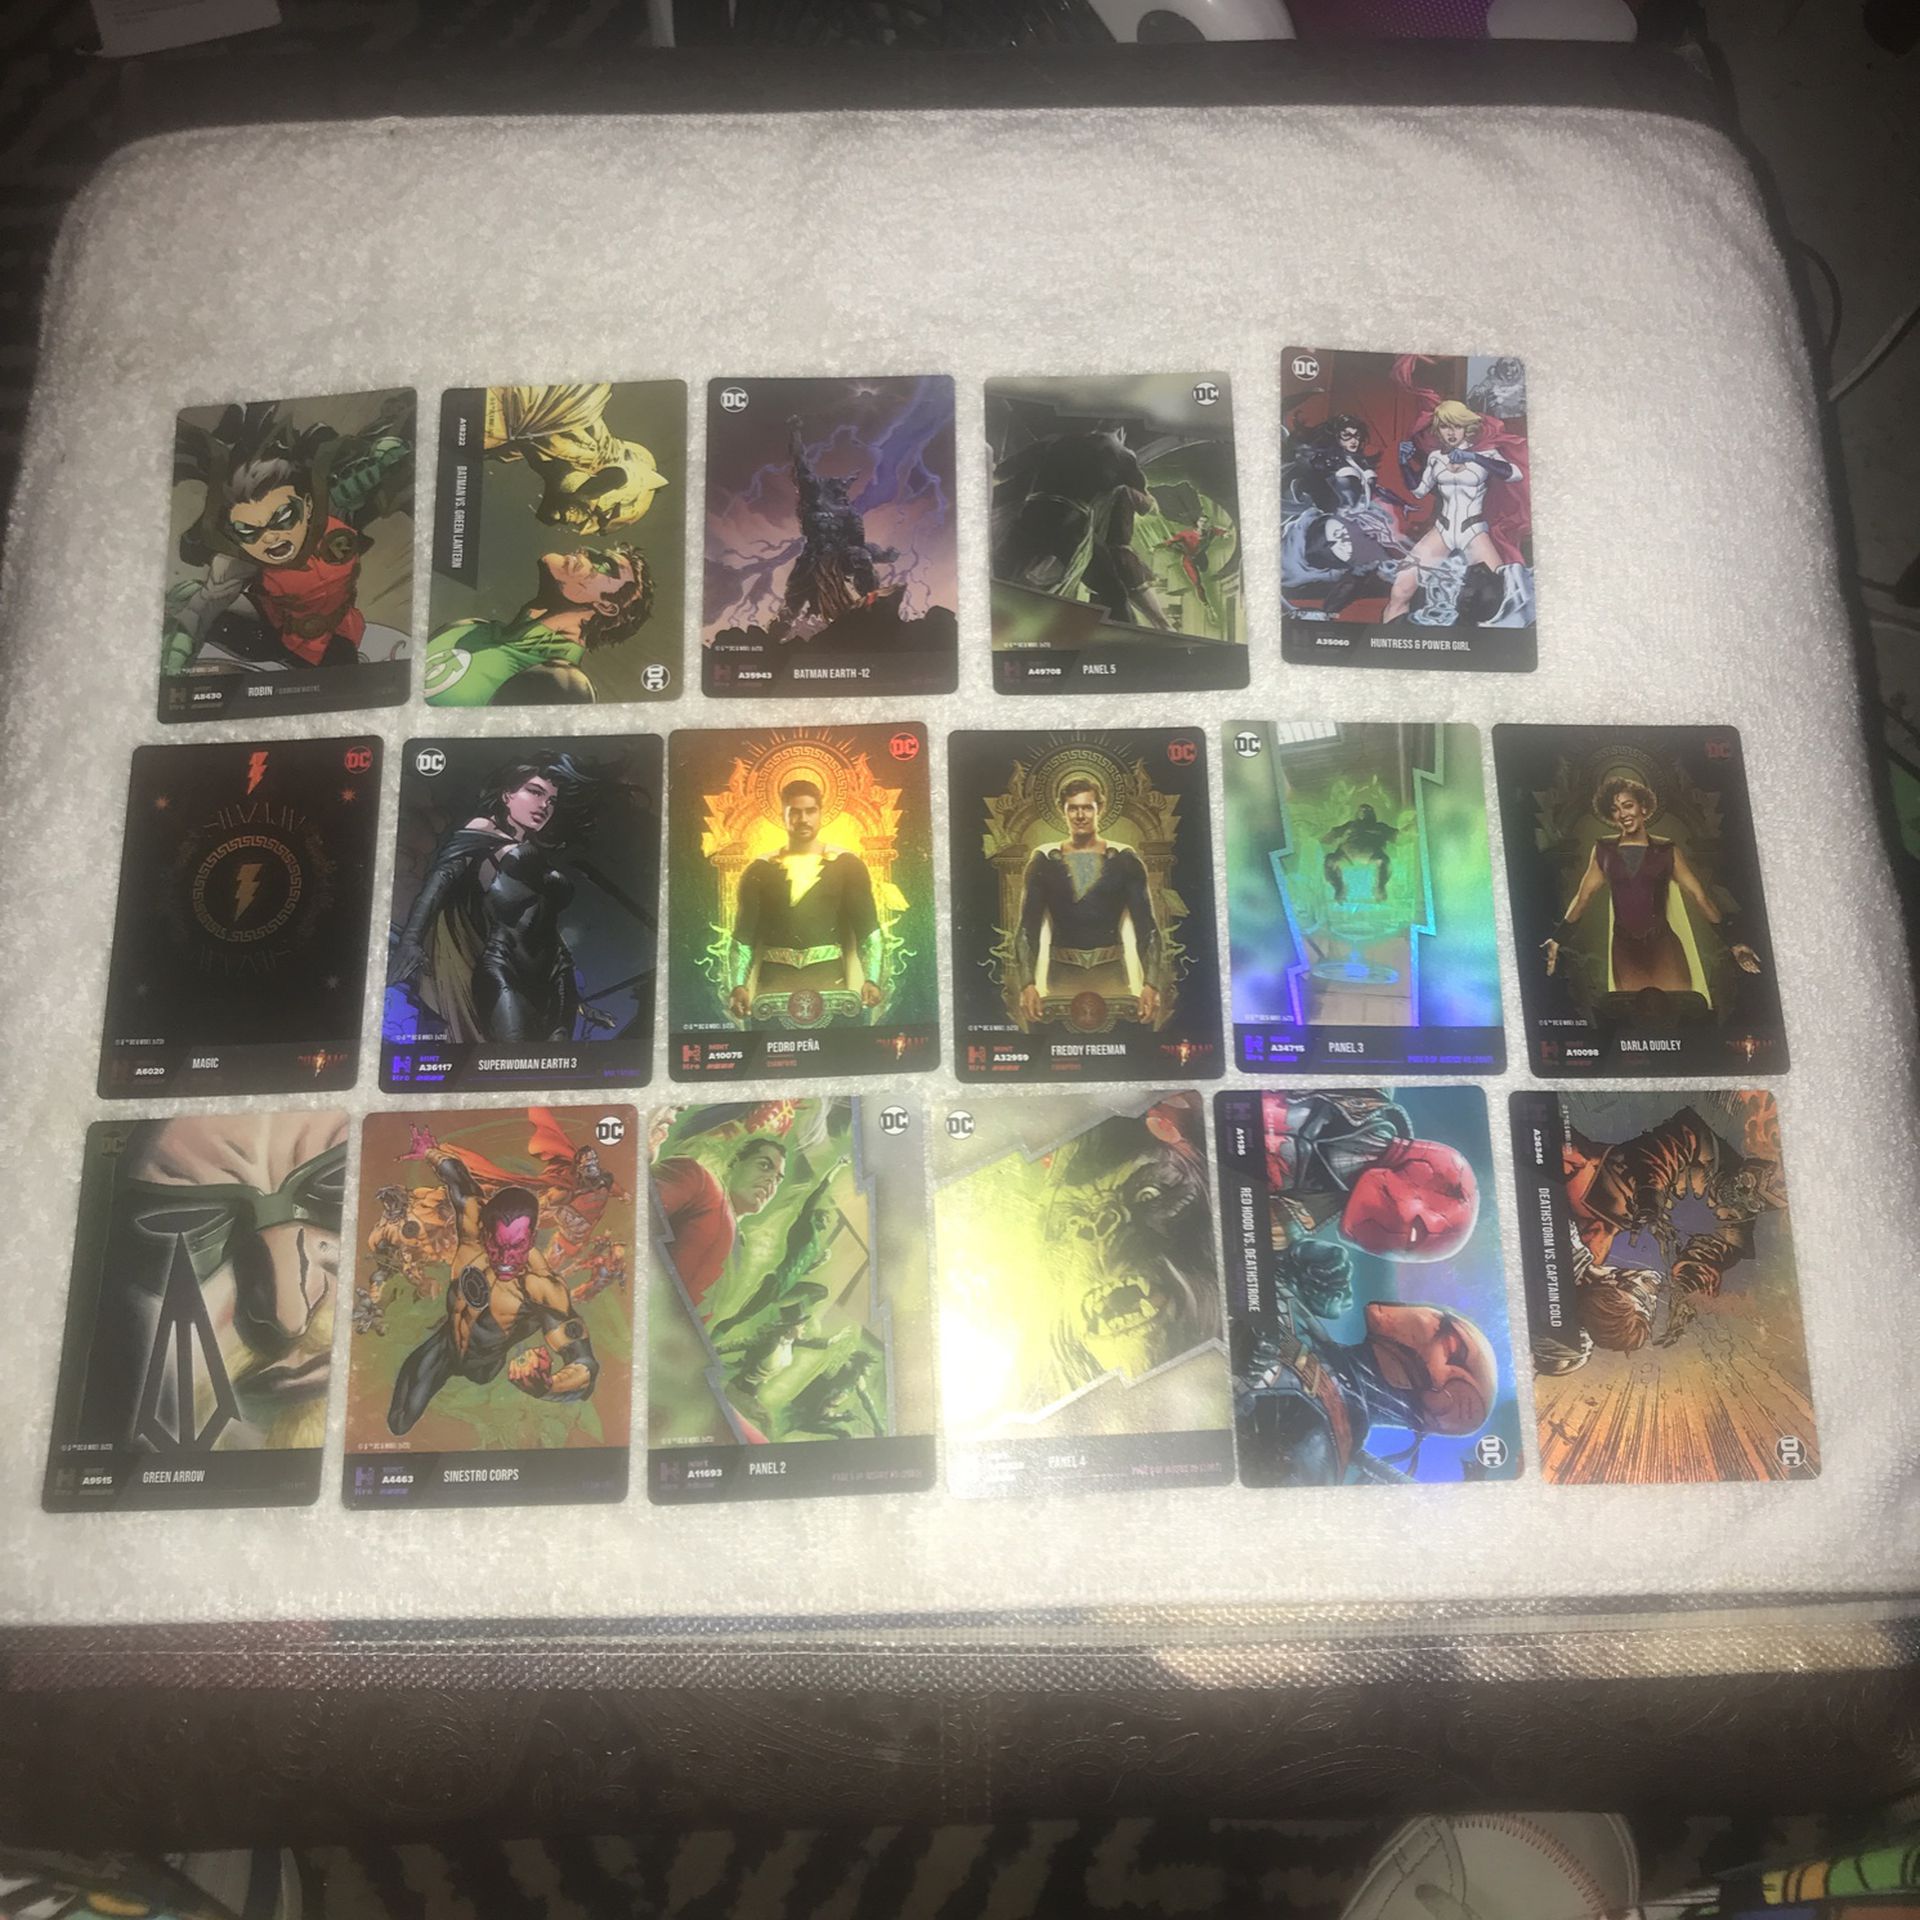 Marvel 1992+ And DC Hro Cards 33 Total 